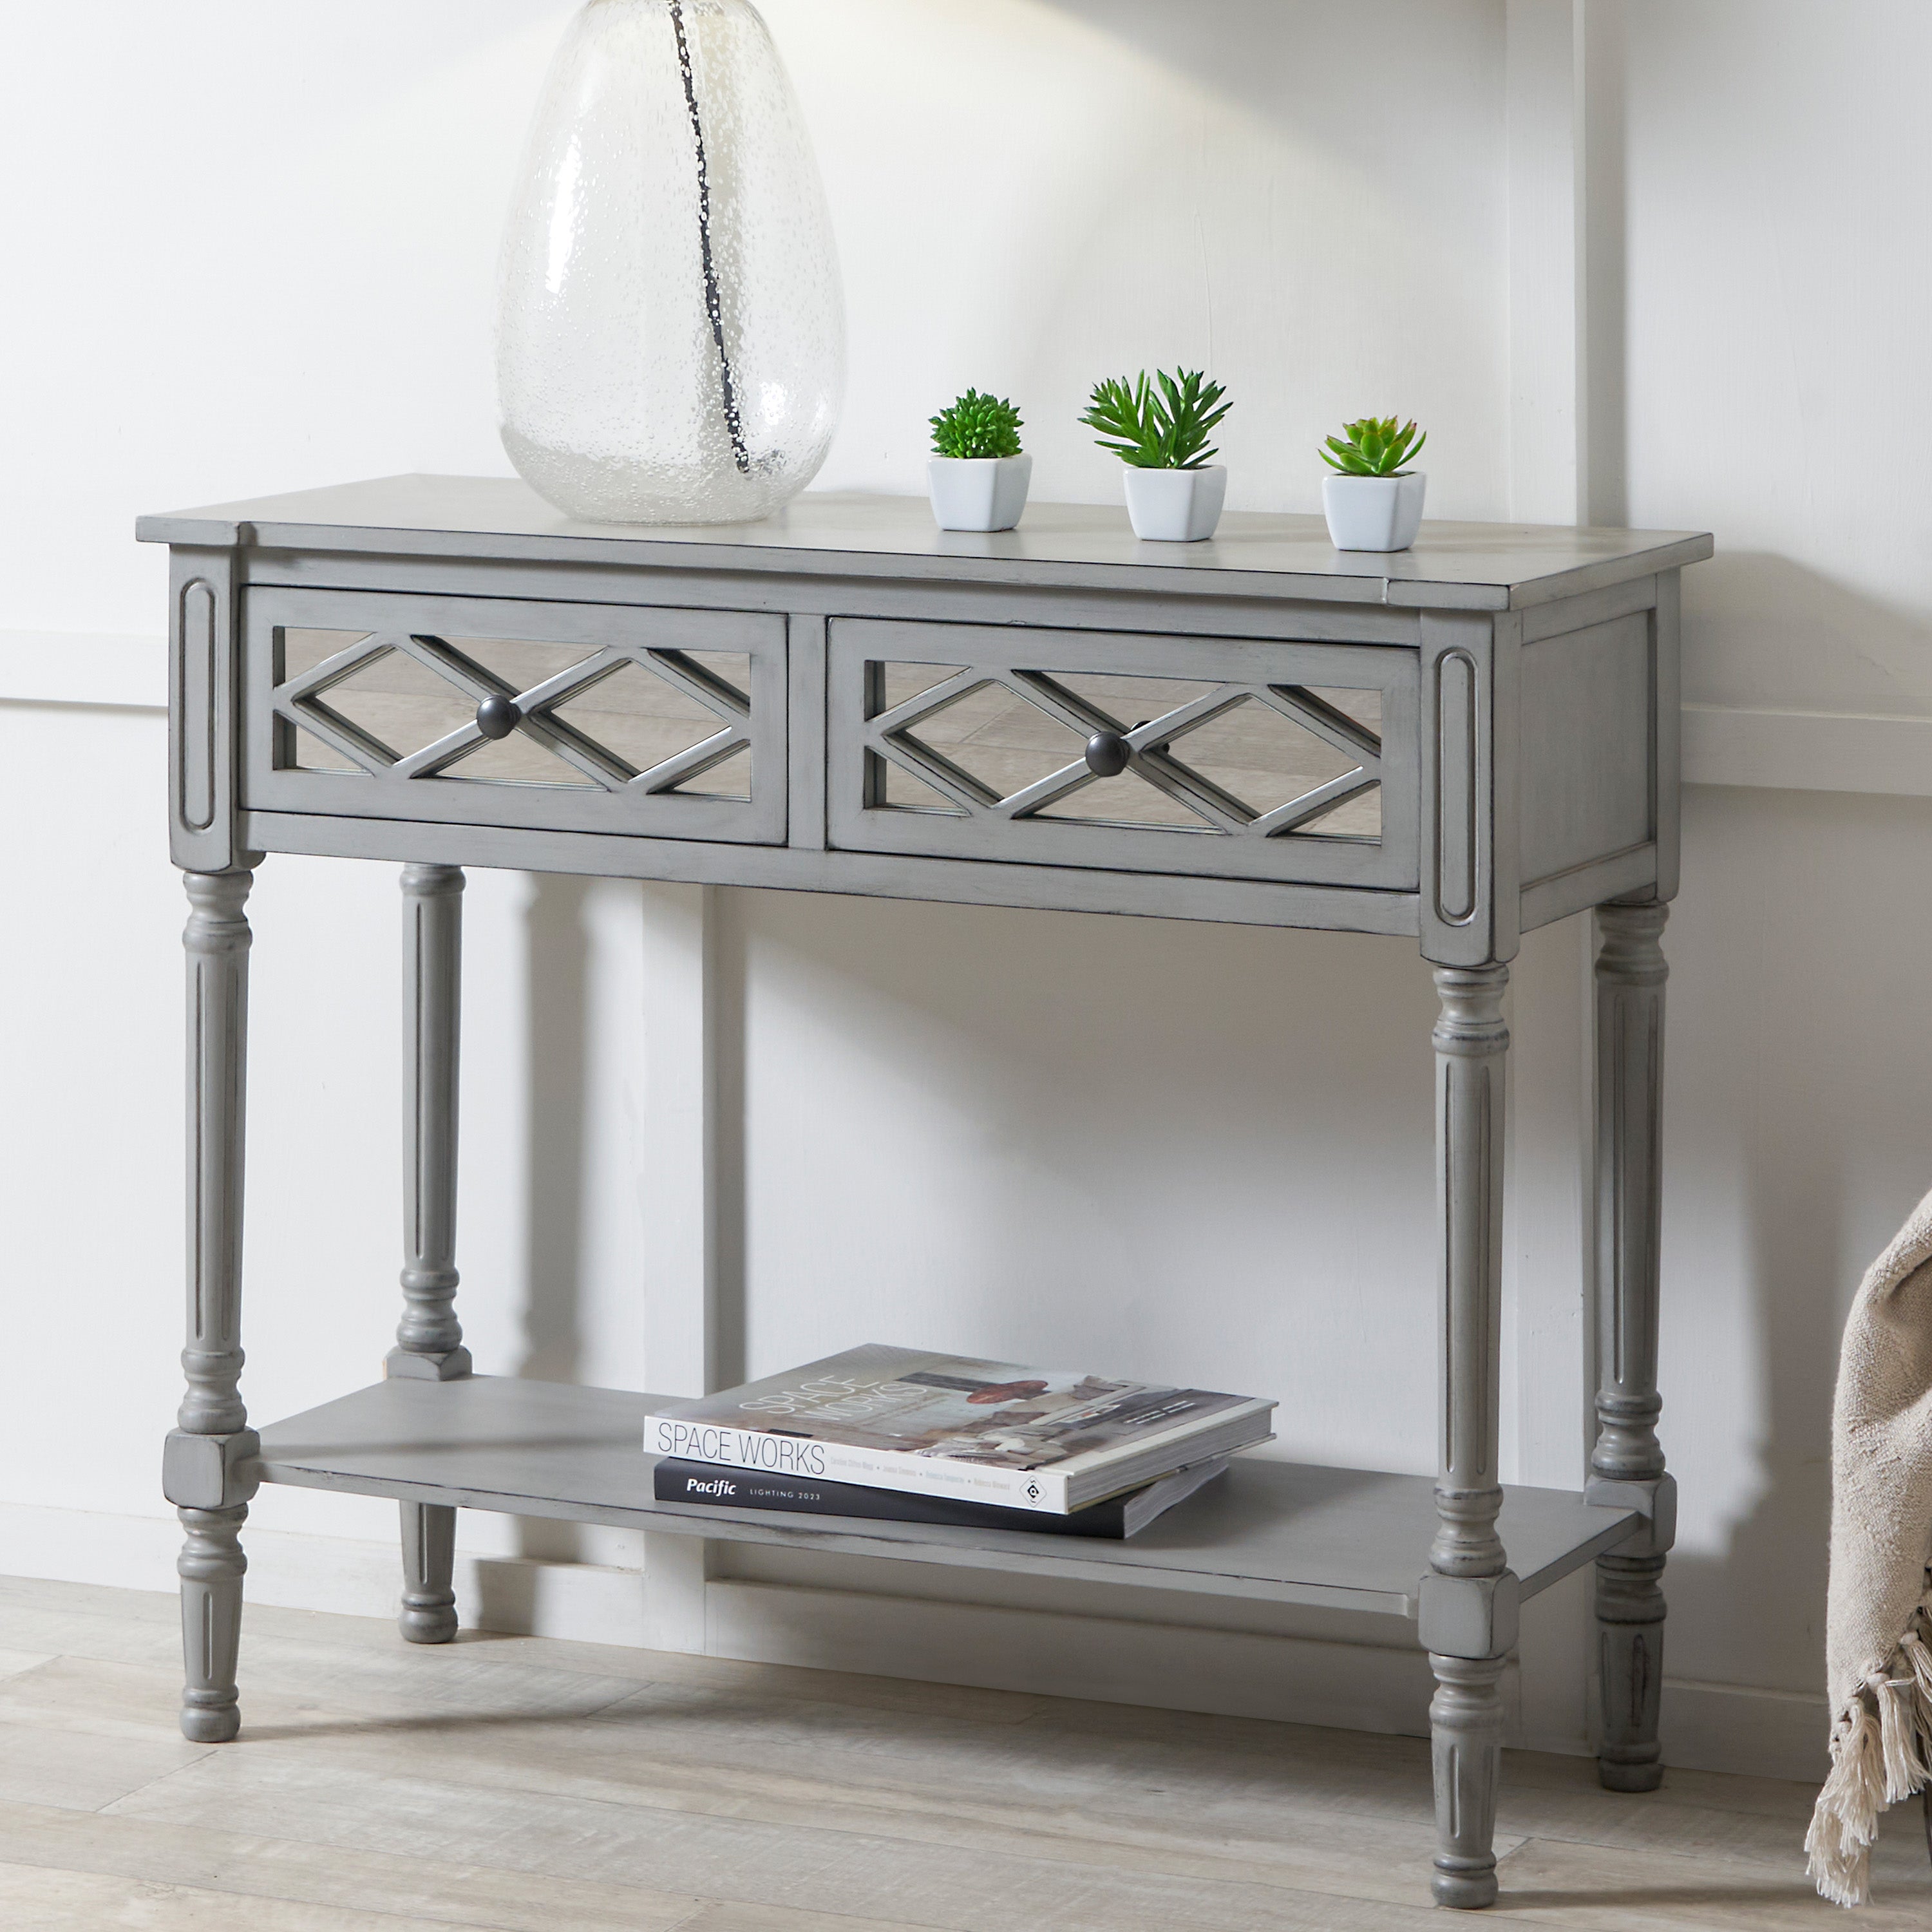 Pacific Puglia Console Table Painted Pine Grey